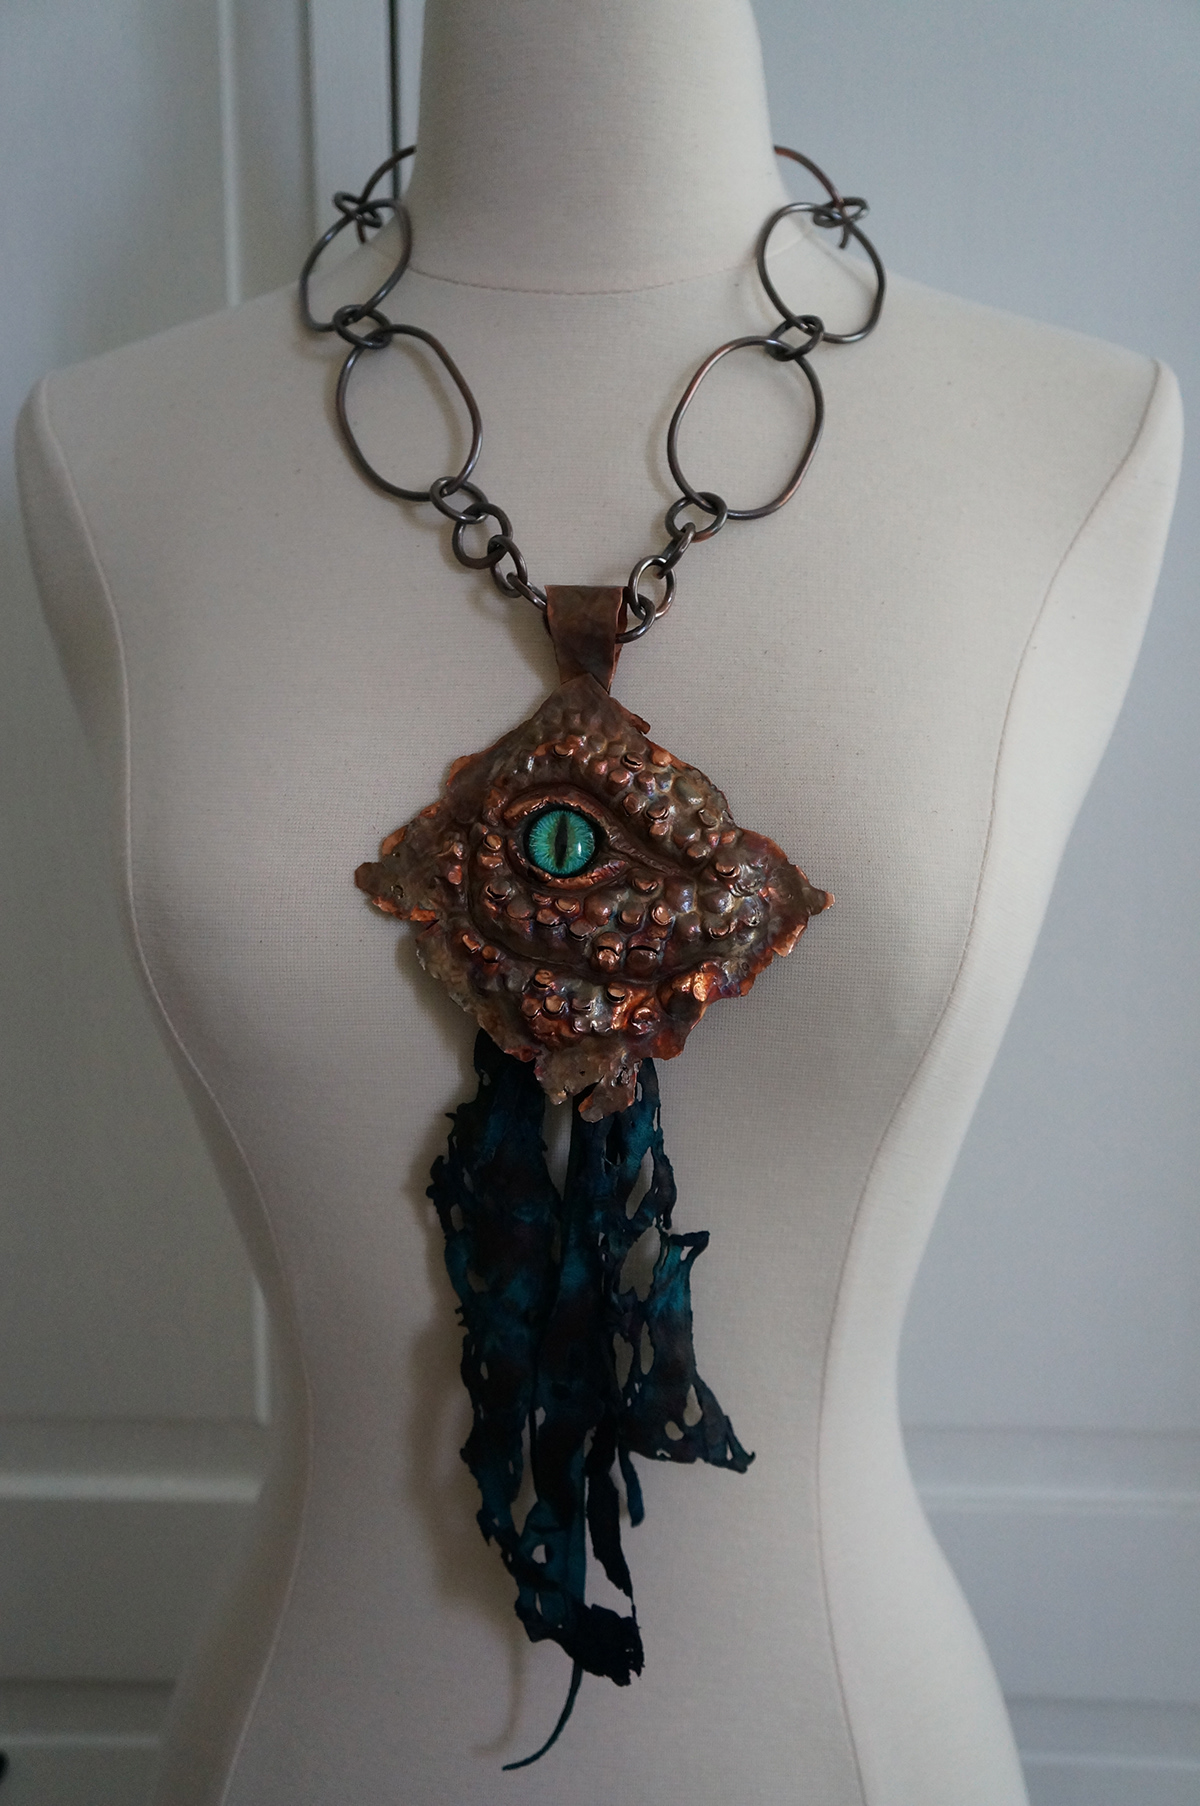 Necklace reptile shedding molting copper leather eye